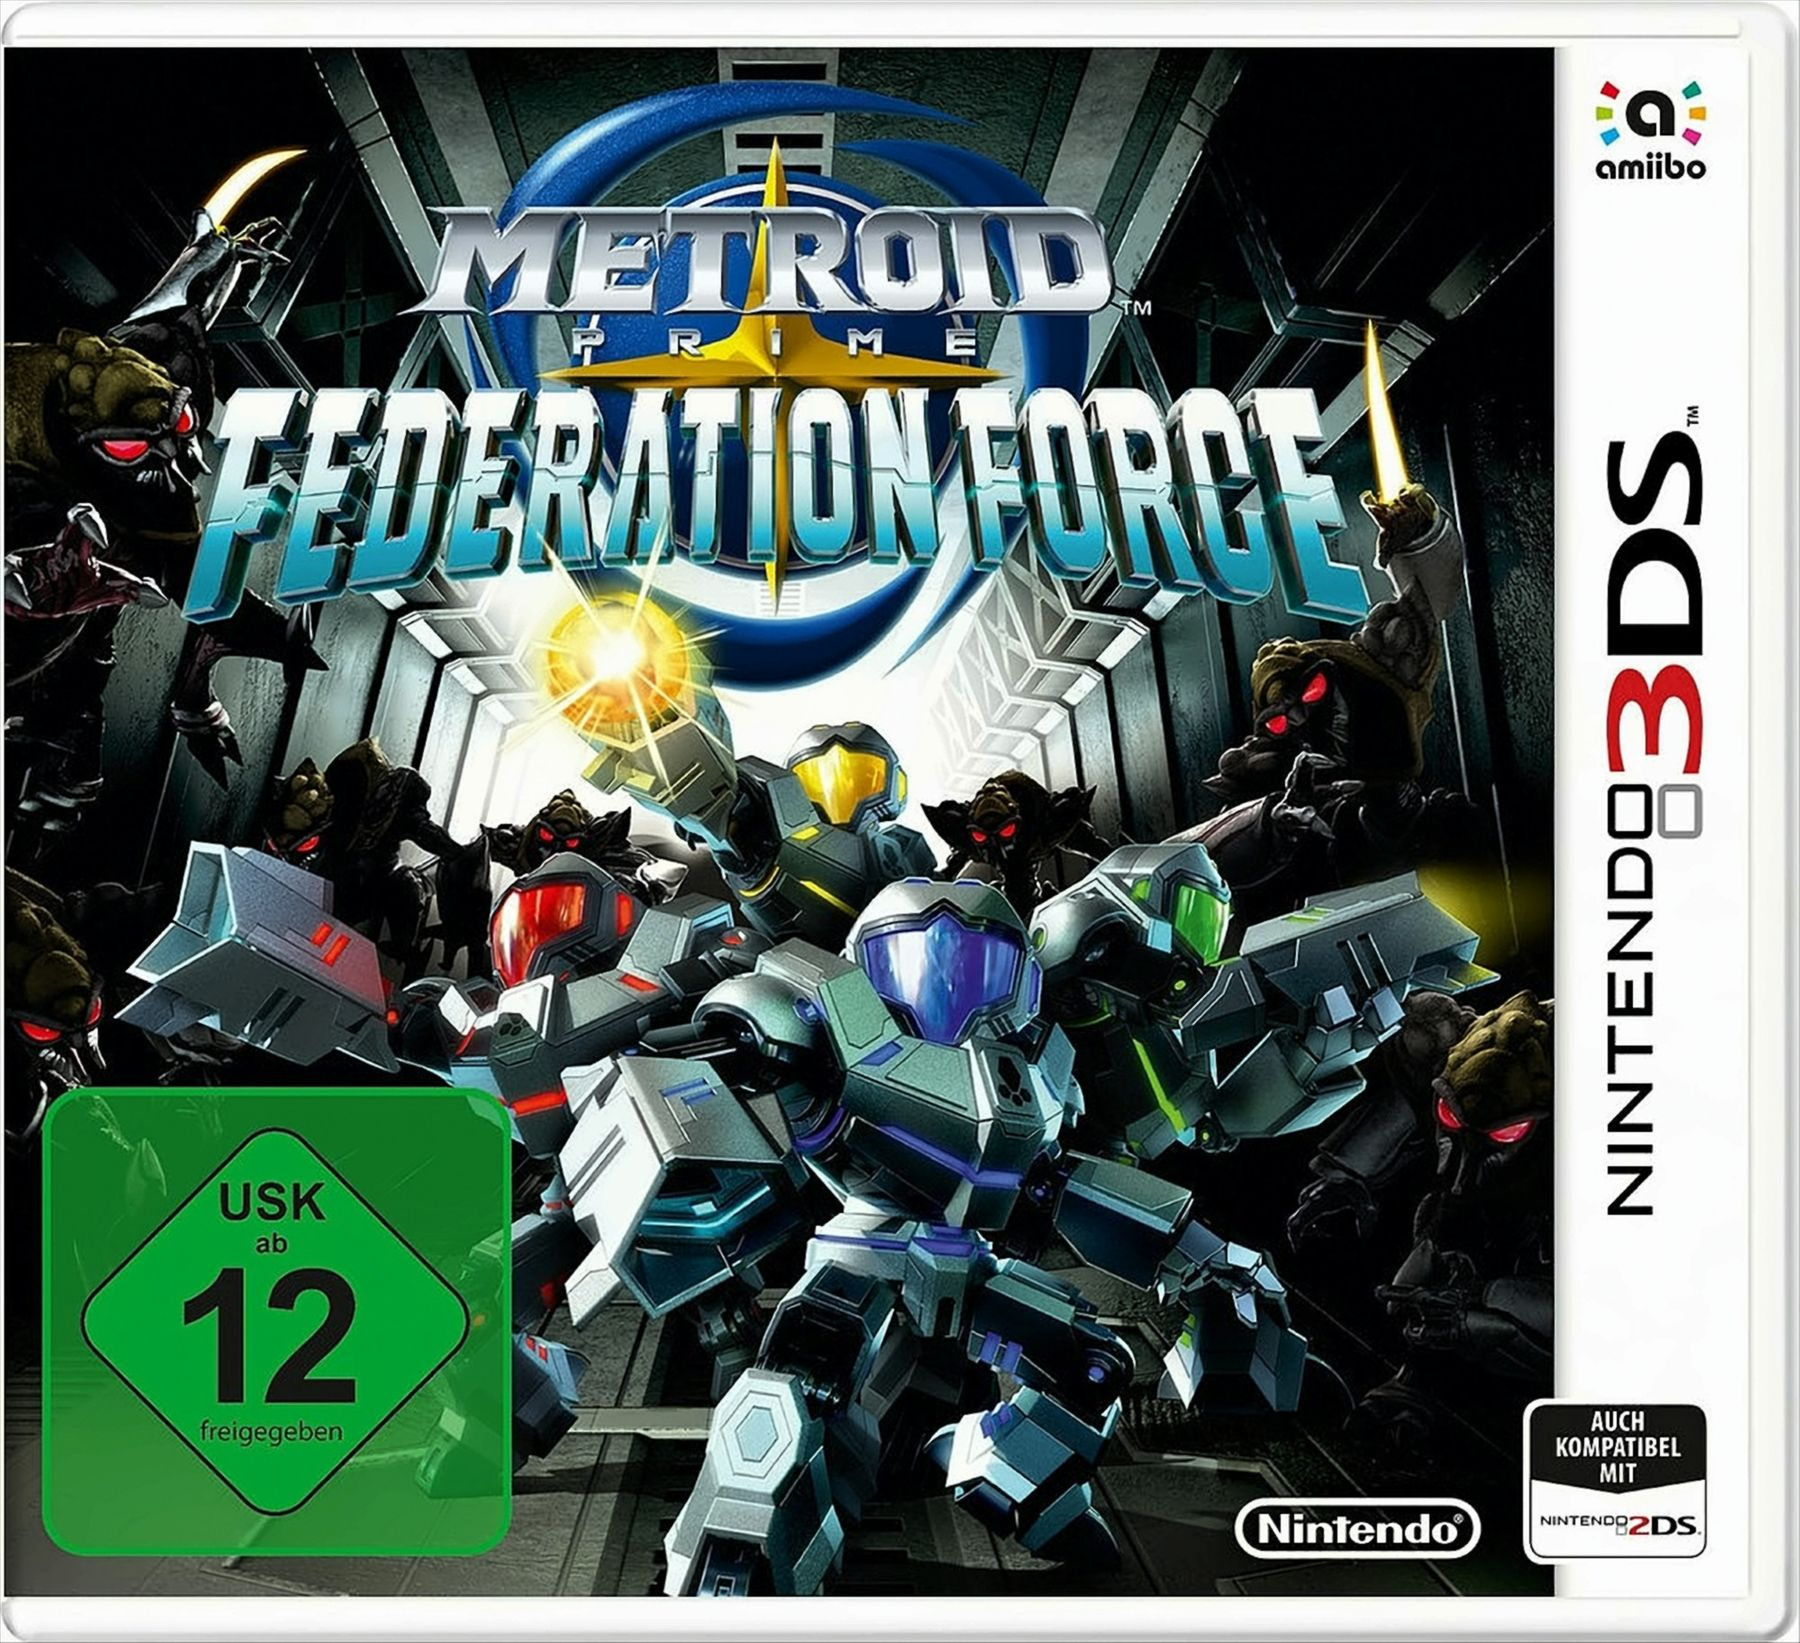 [Nintendo 3DS] Force Federation Prime: Metroid -